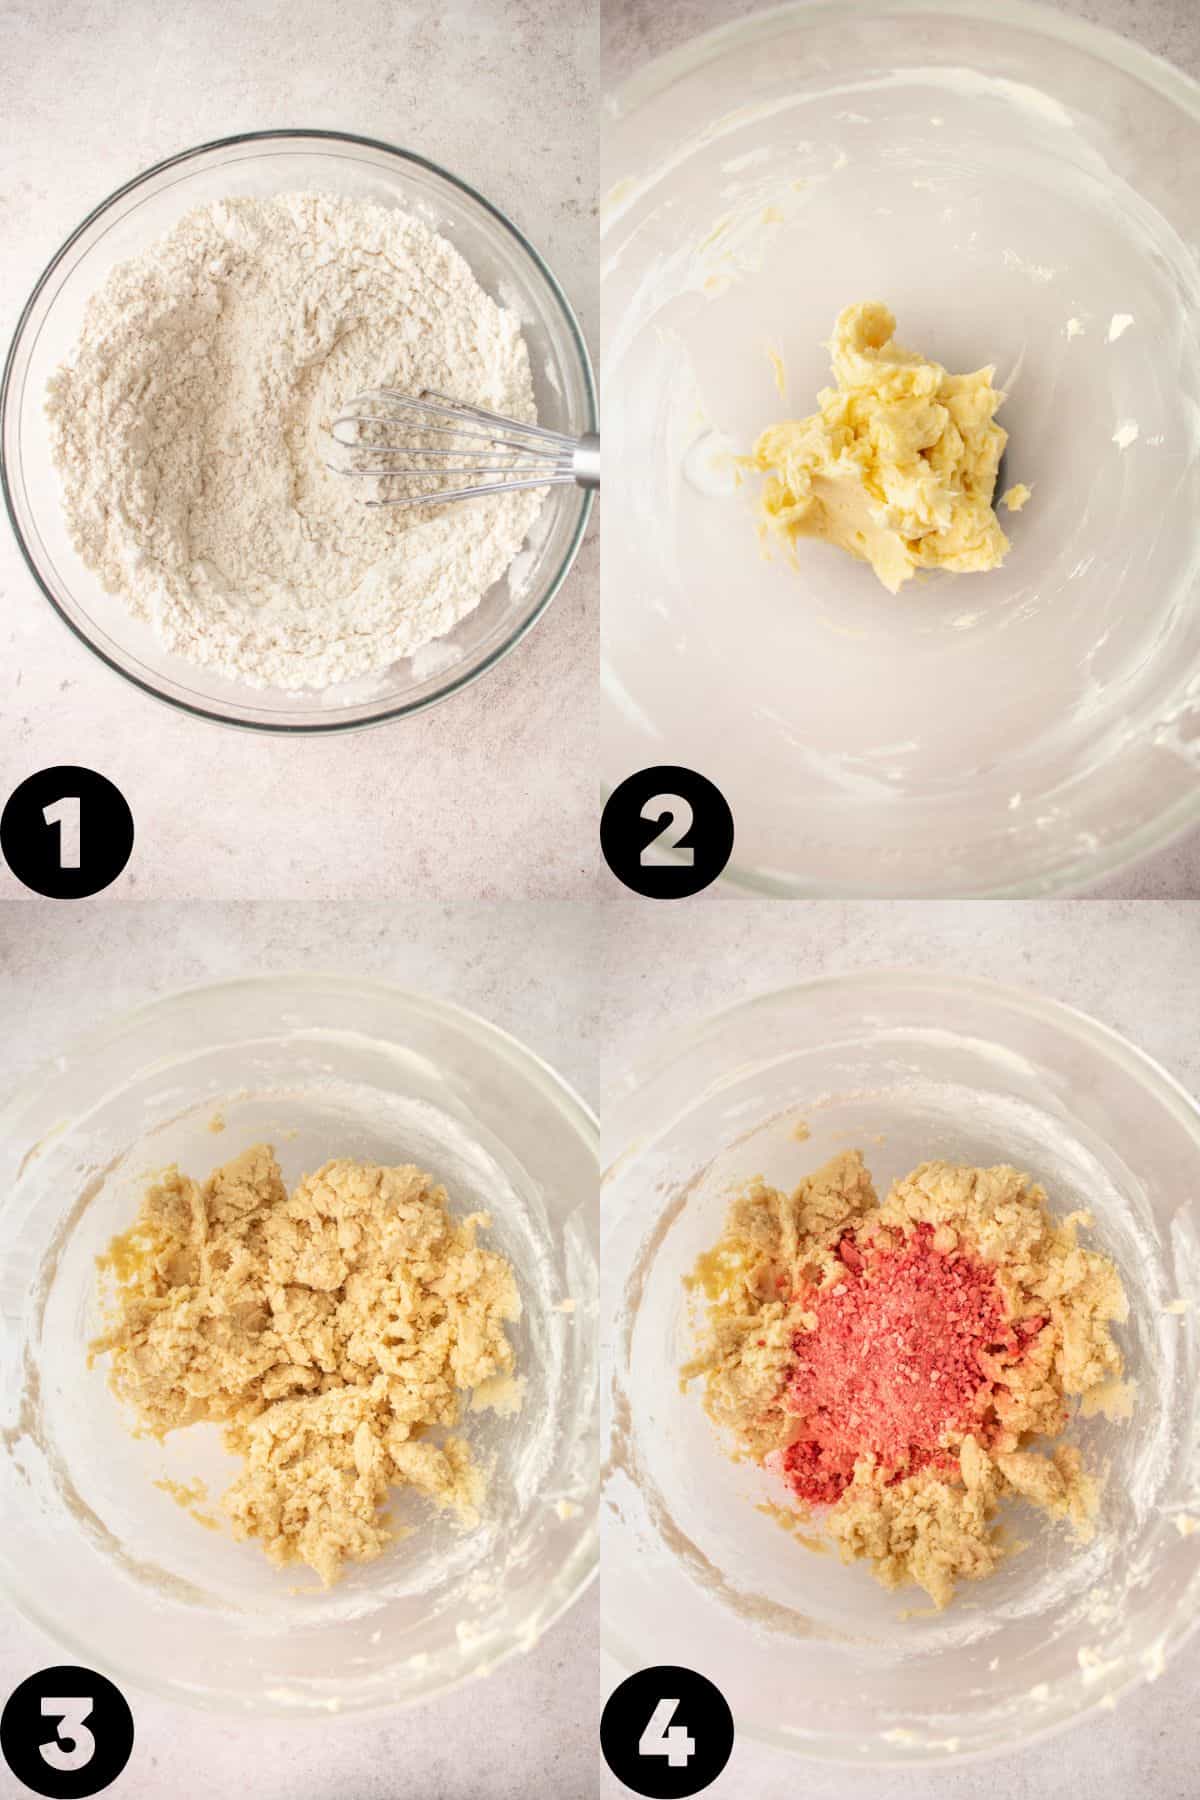 Step by step photos - whisked together dry ingredients, beaten butter and sugar, dry added to butter, added freeze dried strawberries